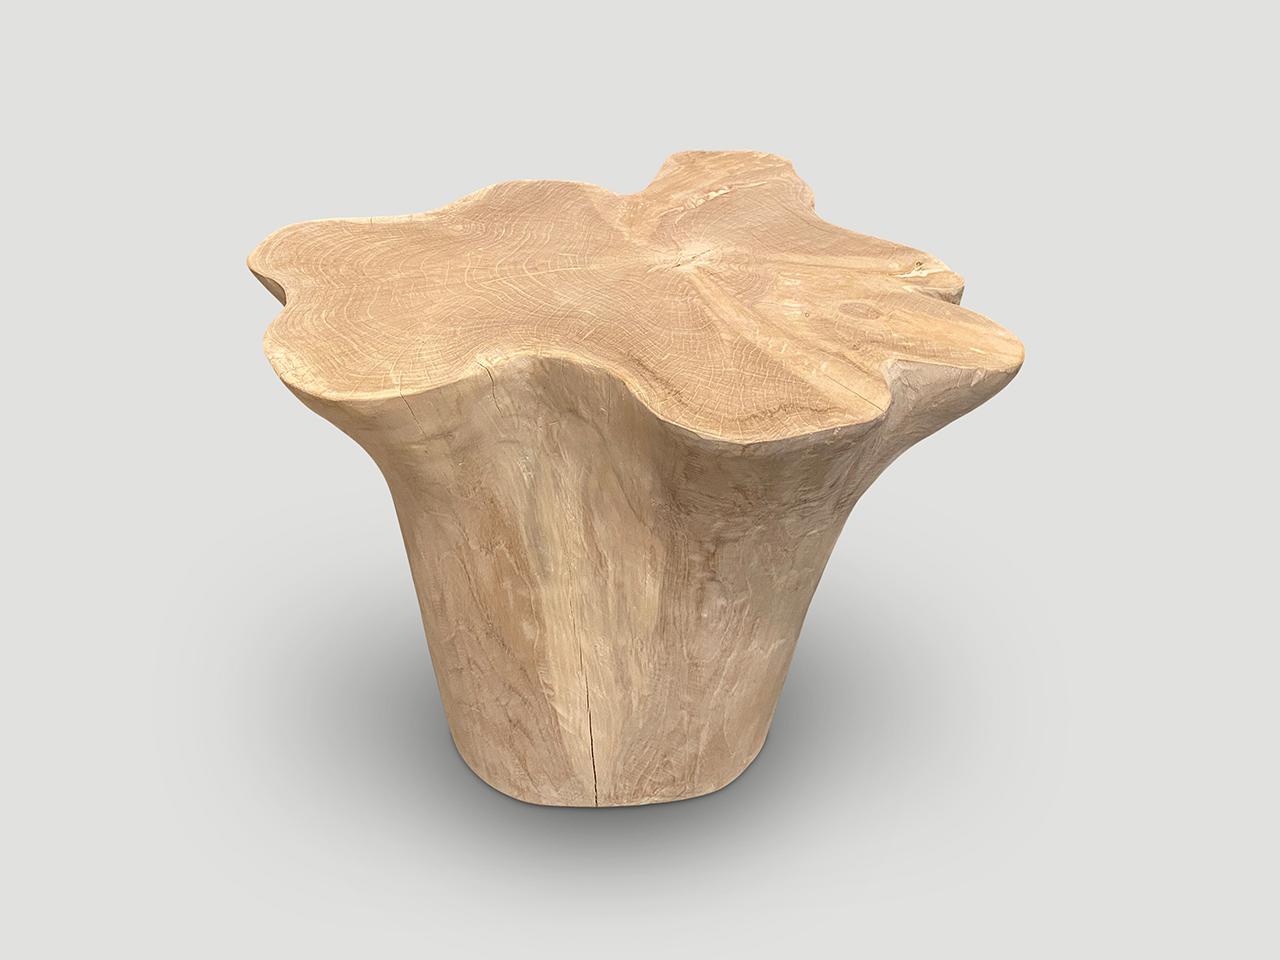 Andrianna Shamaris St. Barts Bleached Teak Side Table or Pedestal In Excellent Condition For Sale In New York, NY